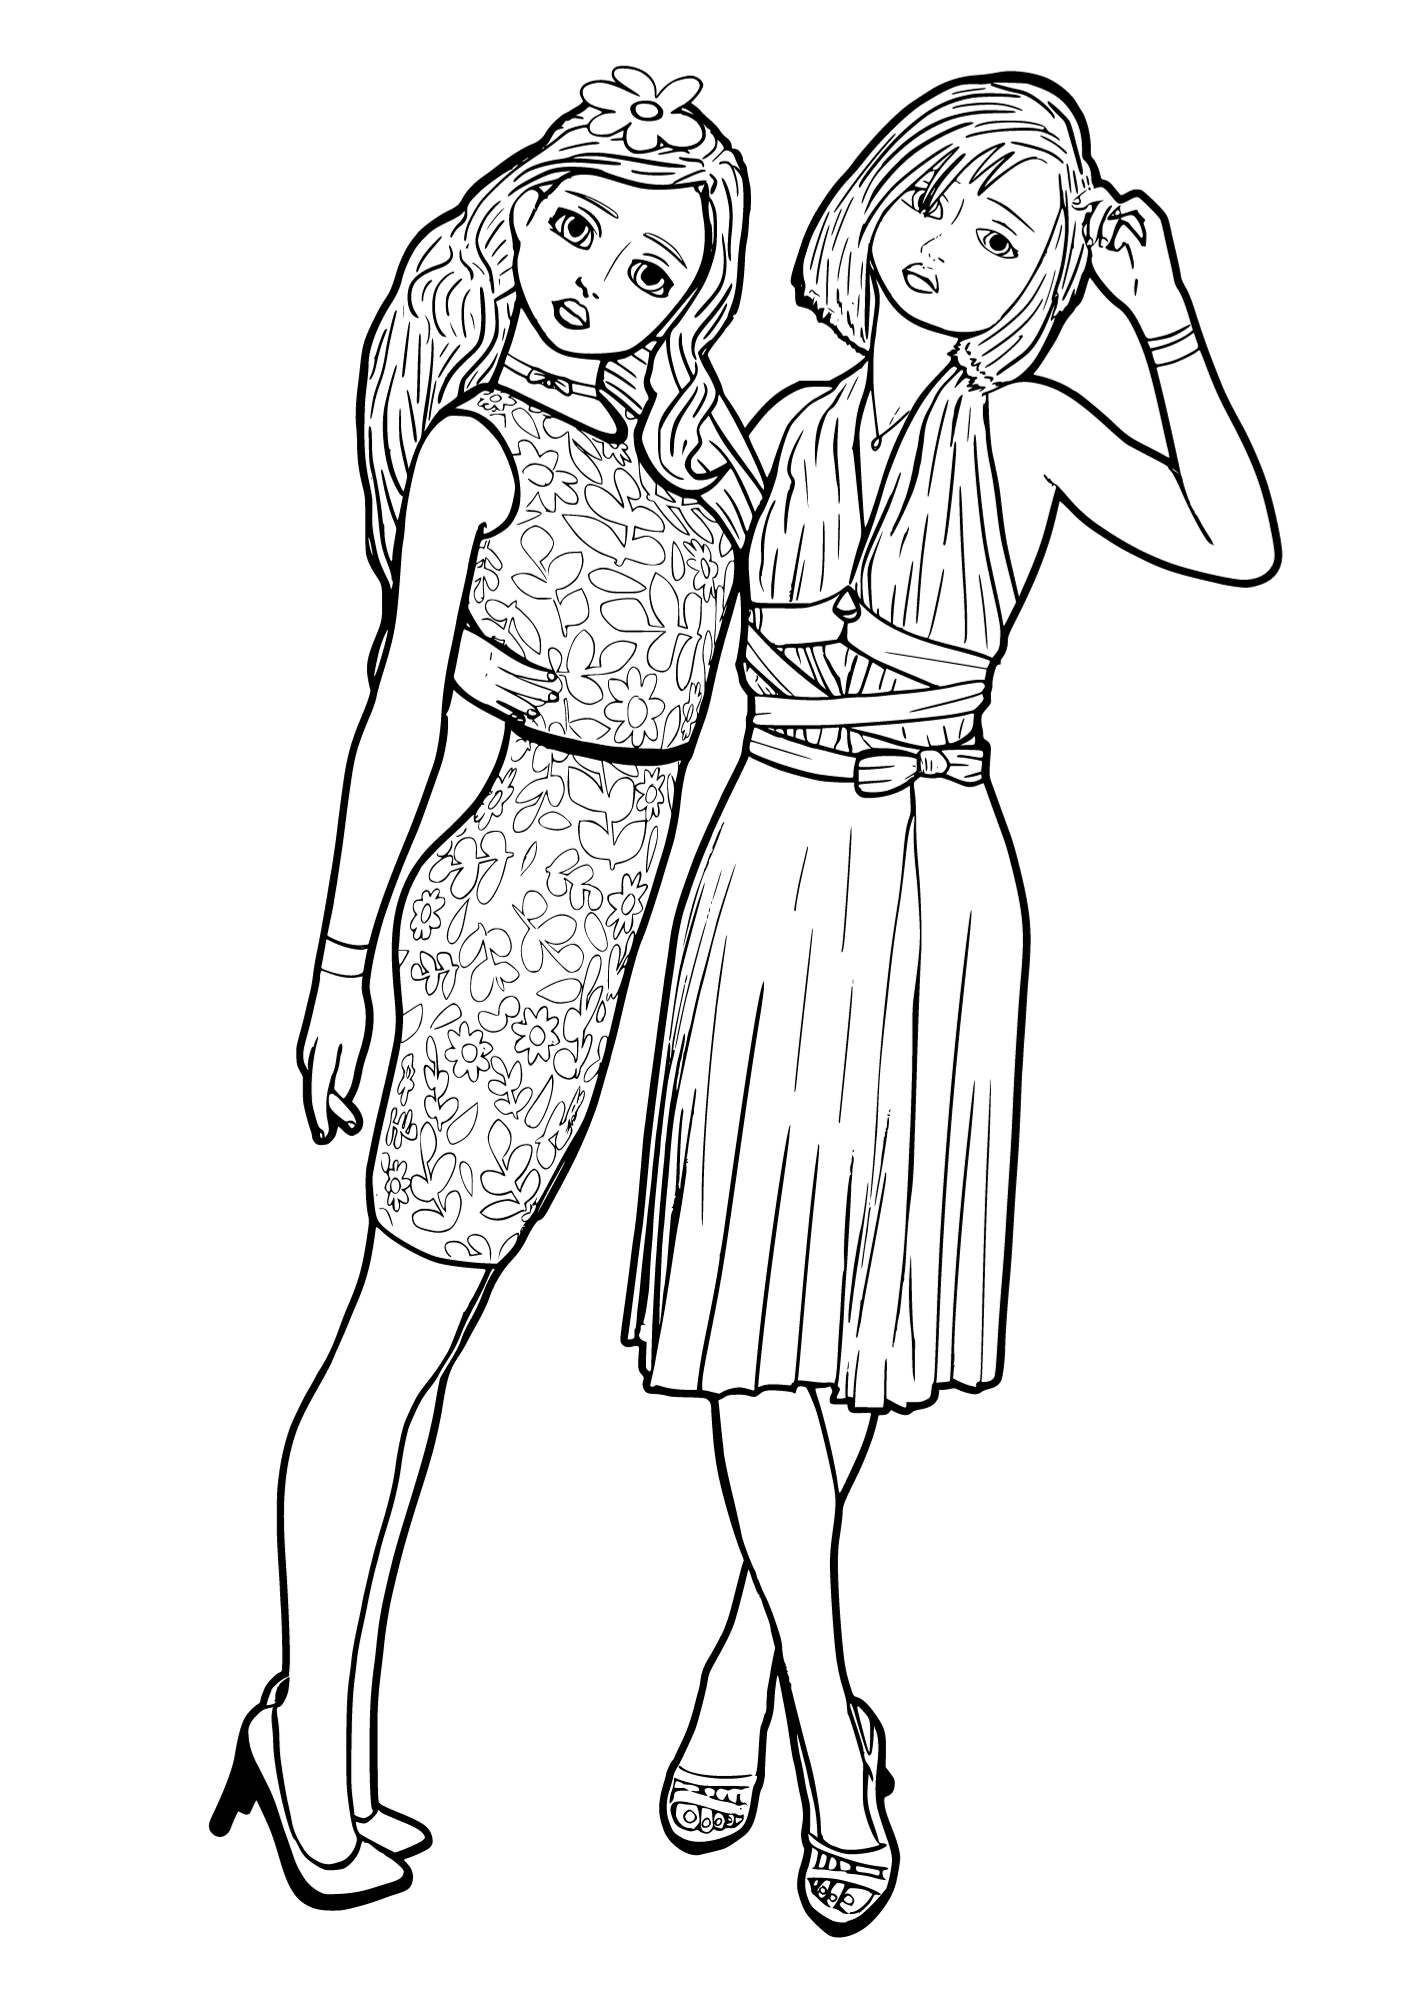 Coloring page featuring stylish women enjoying a day out